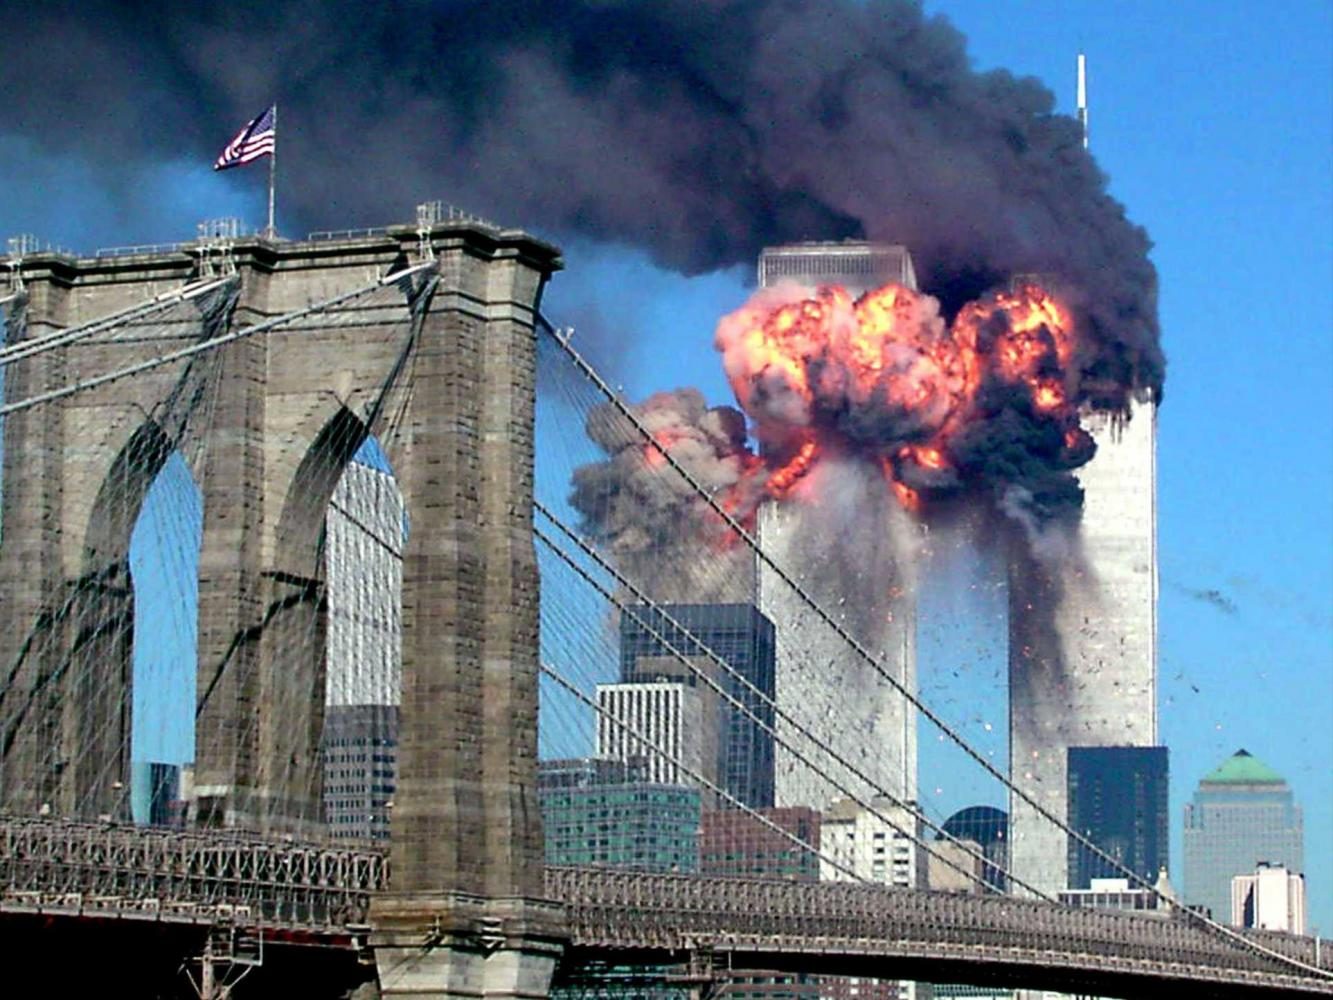 The South Tower of the World Trade Center after being hit by Flight 175 at 9:03 AM on September 11th.